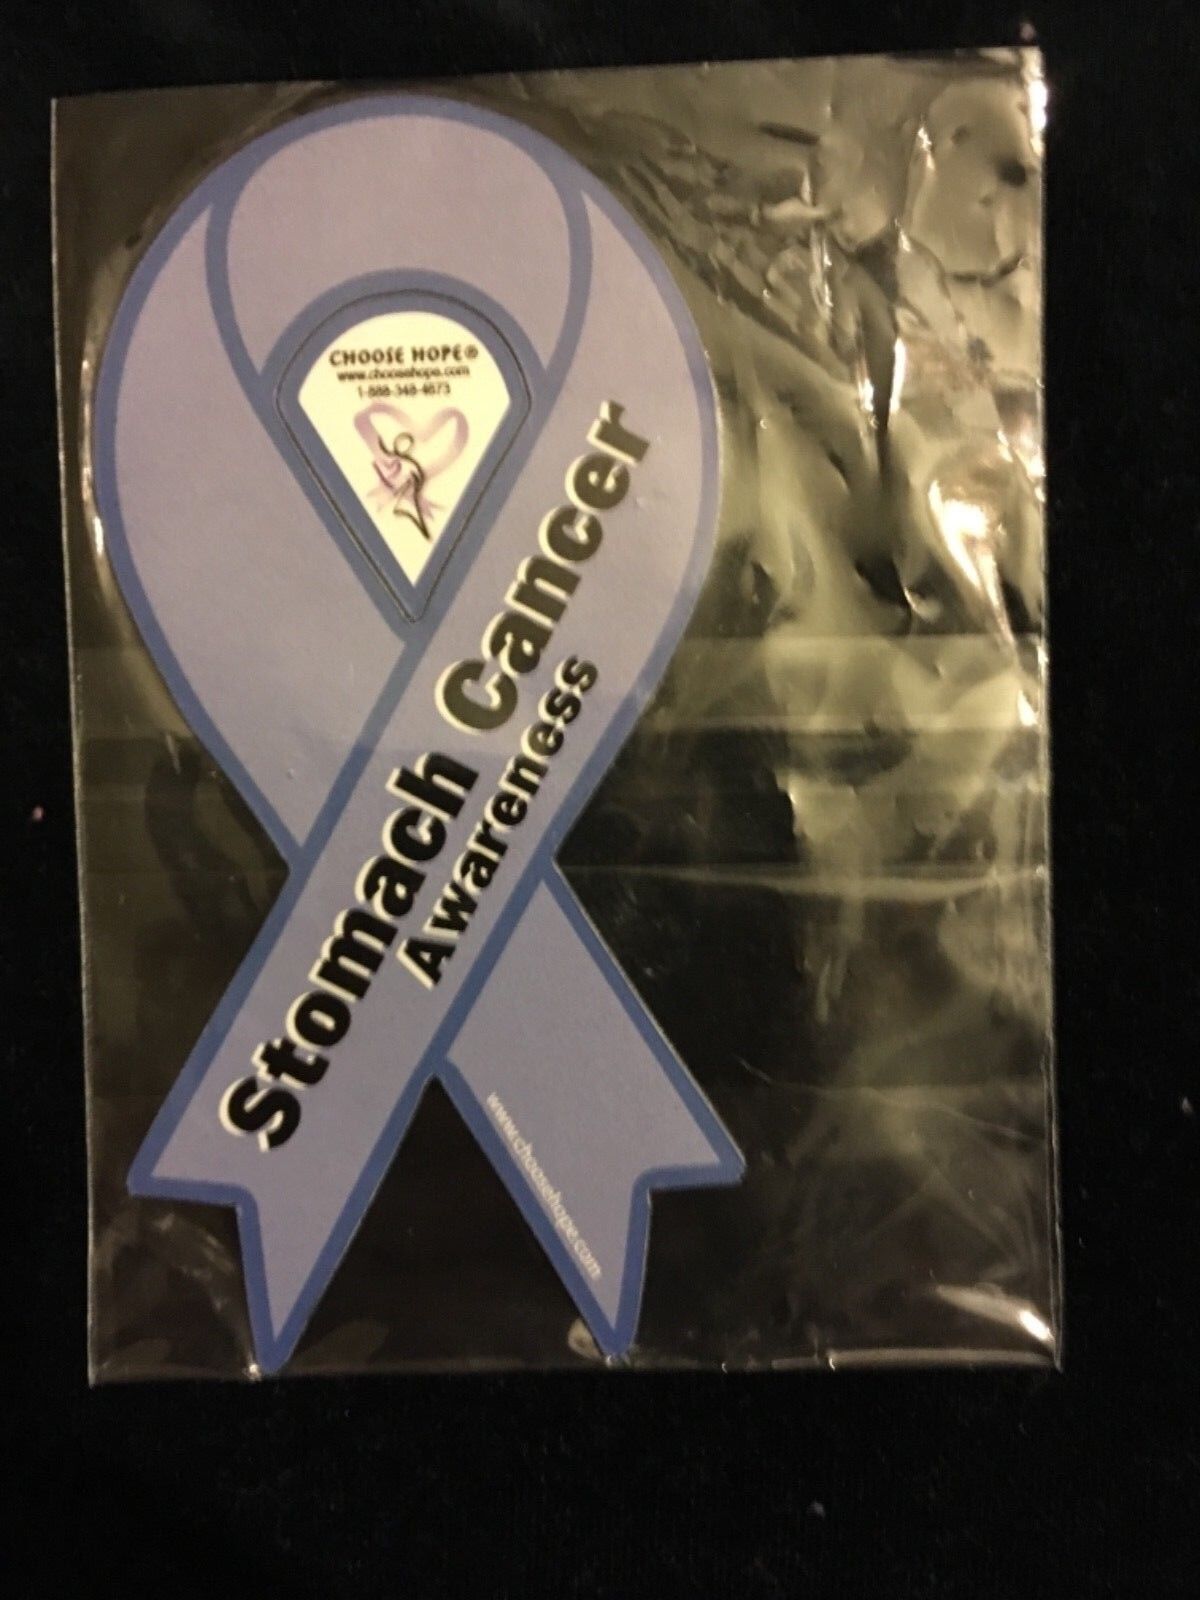 STOMACH CANCER AWARENESS MINI MAGNET (NEW IN PACKAGE)